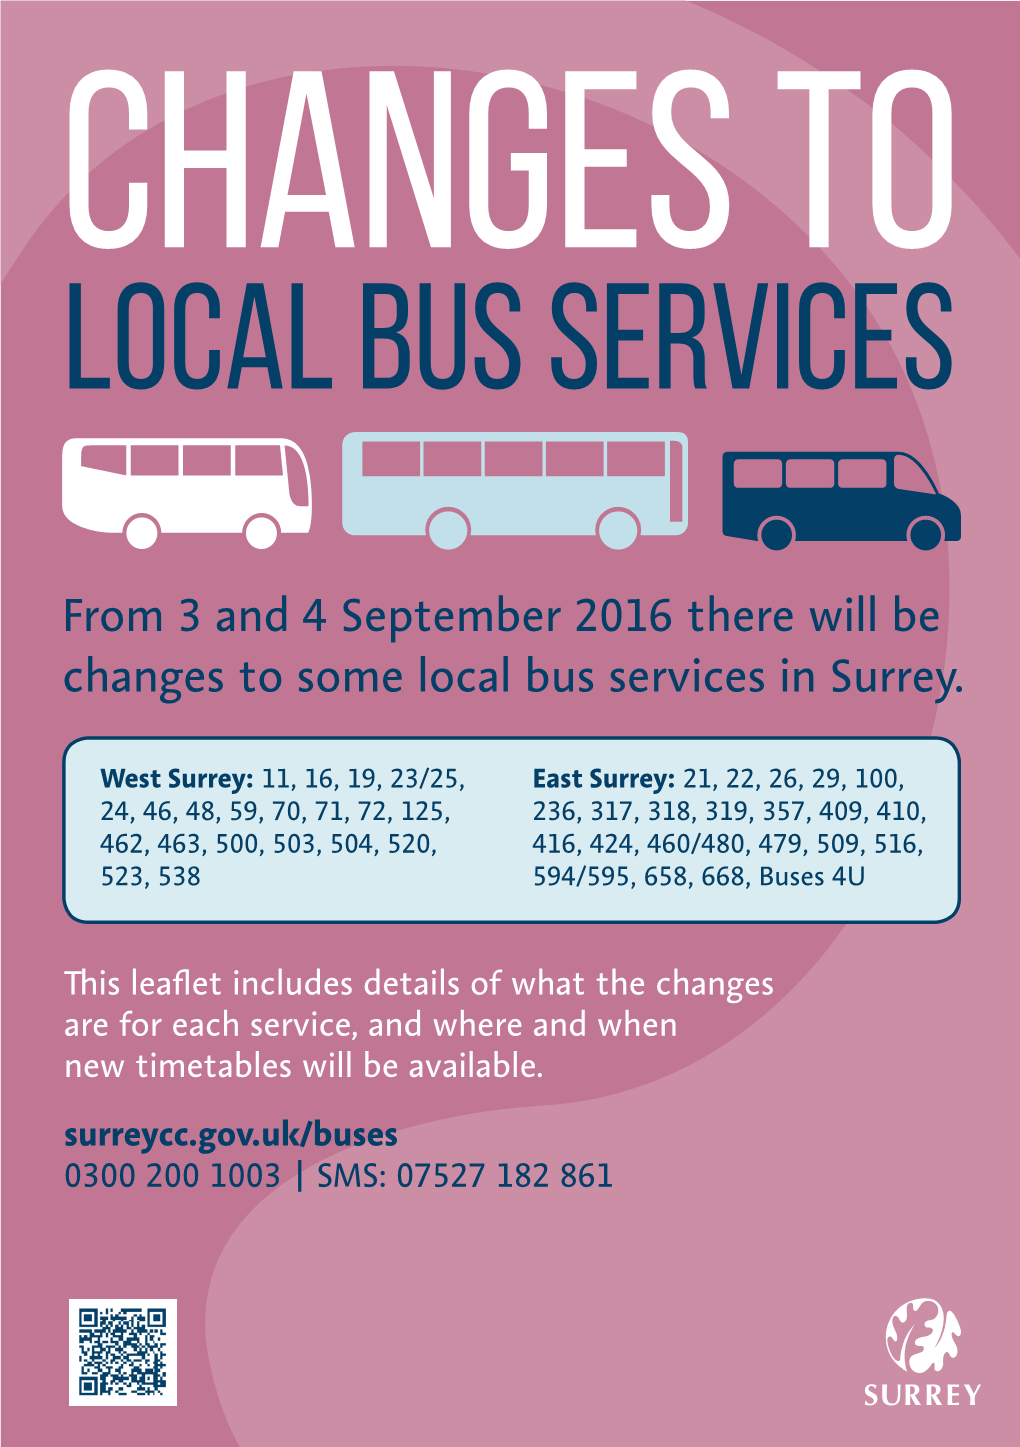 From 3 and 4 September 2016 There Will Be Changes to Some Local Bus Services in Surrey